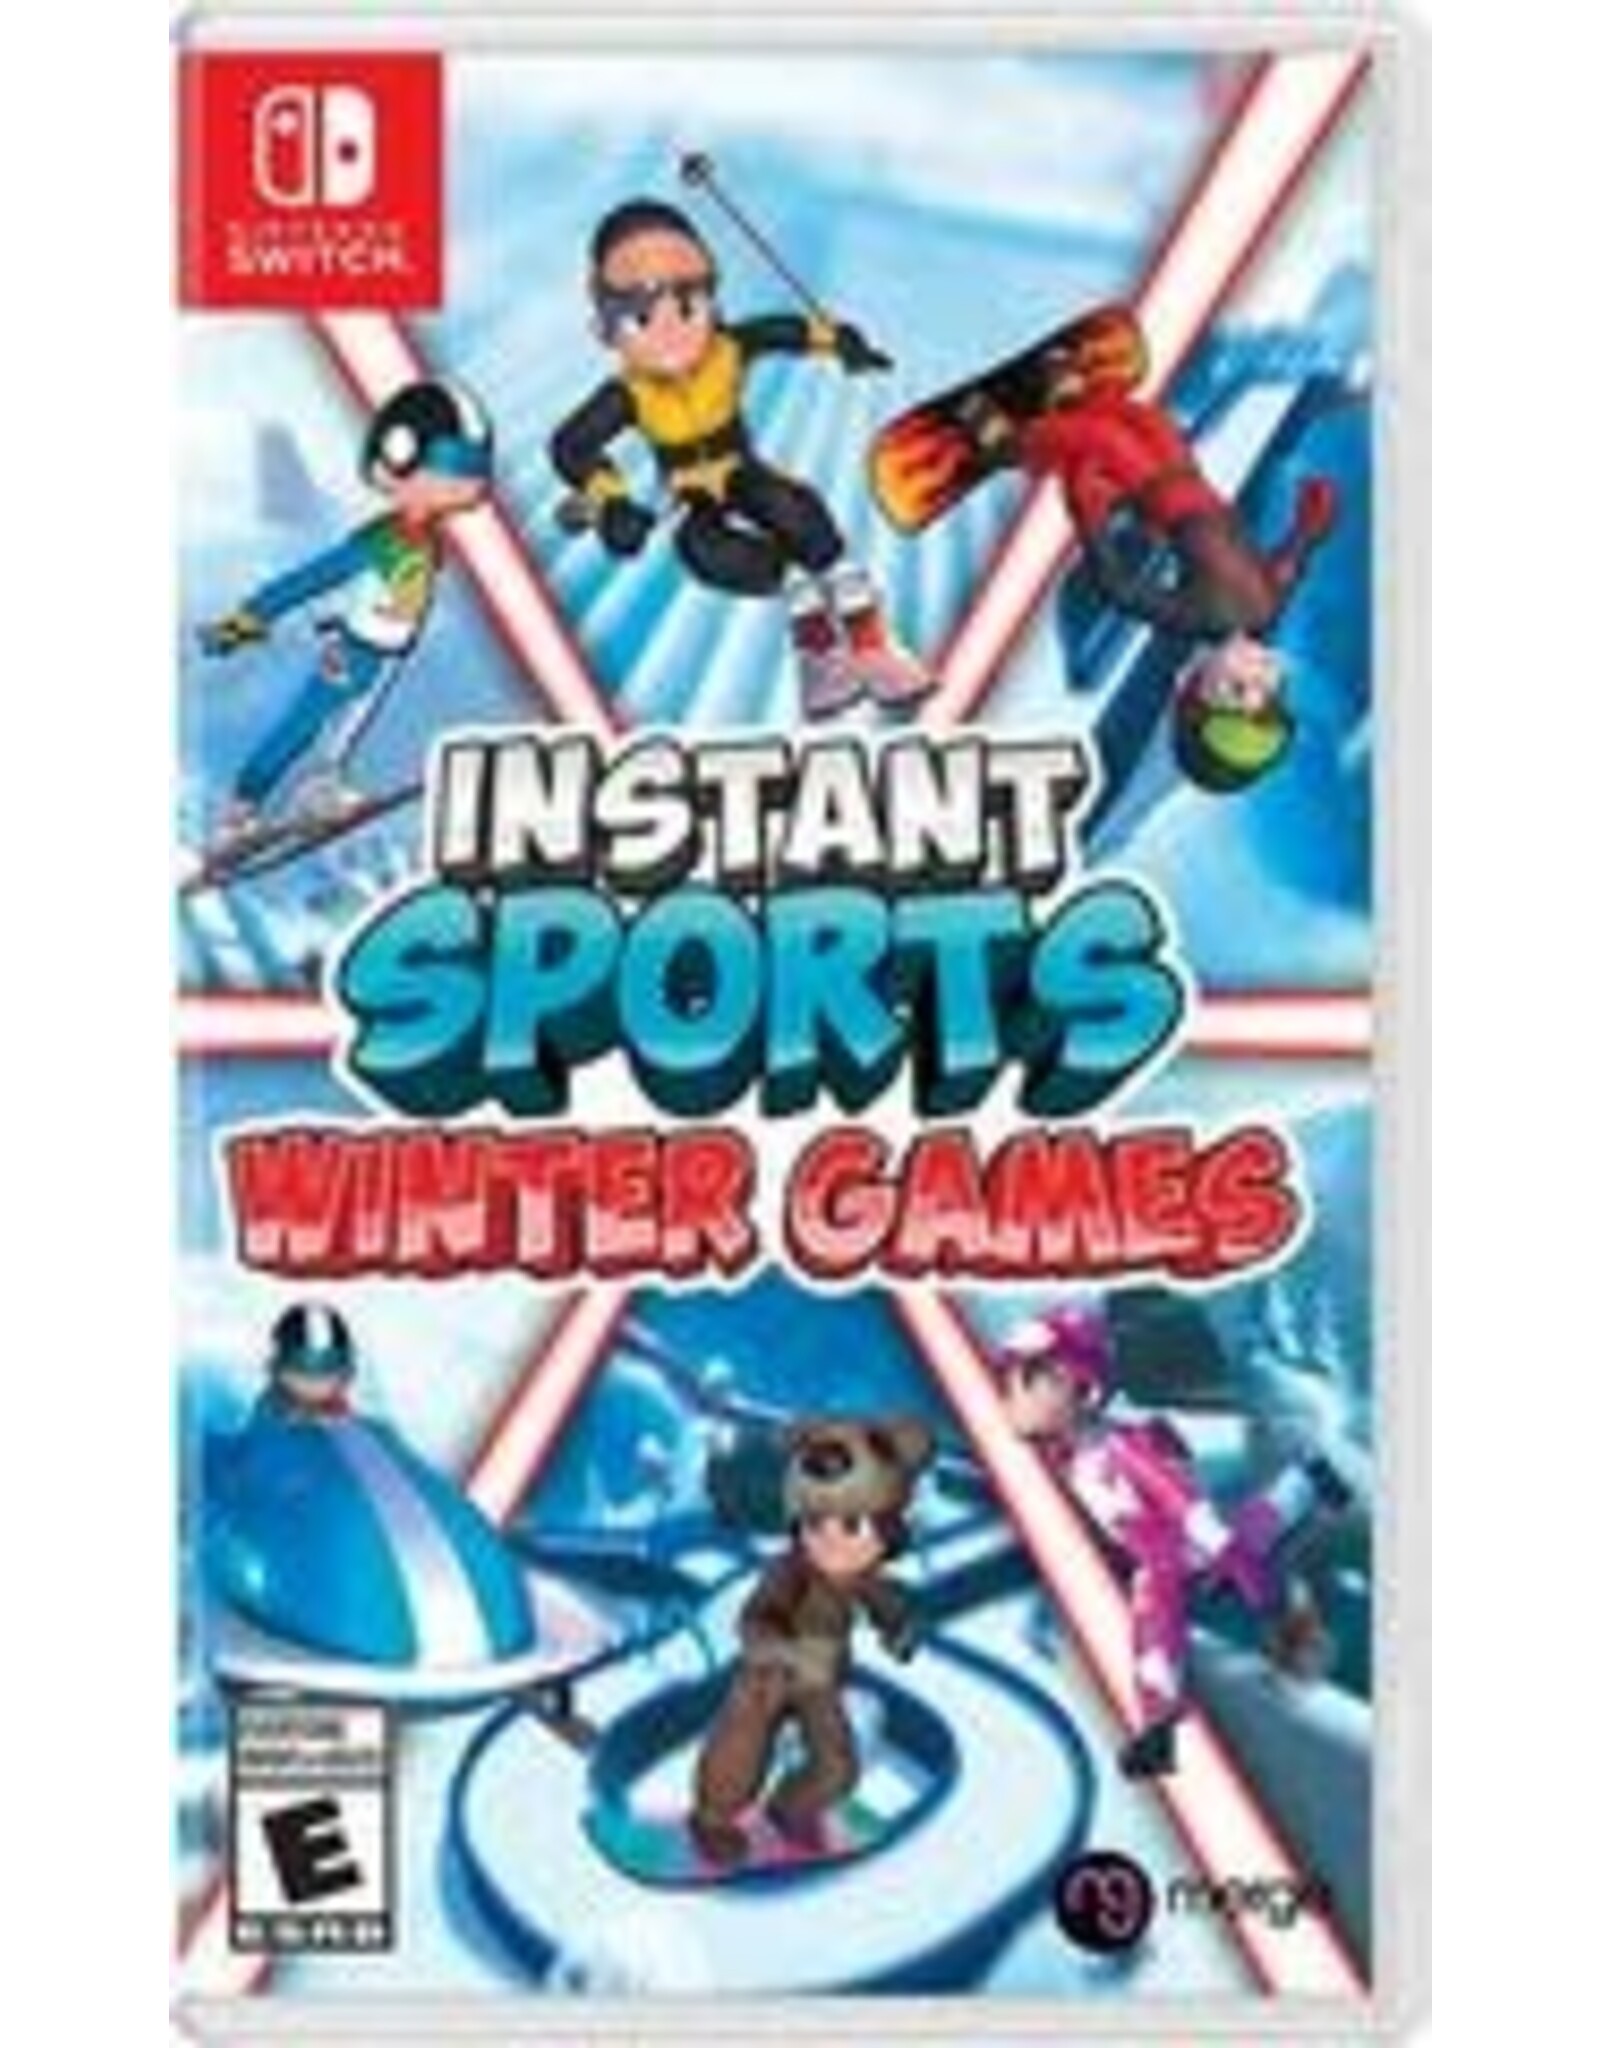 Nintendo Switch Instant Sports Winter Games (Used)